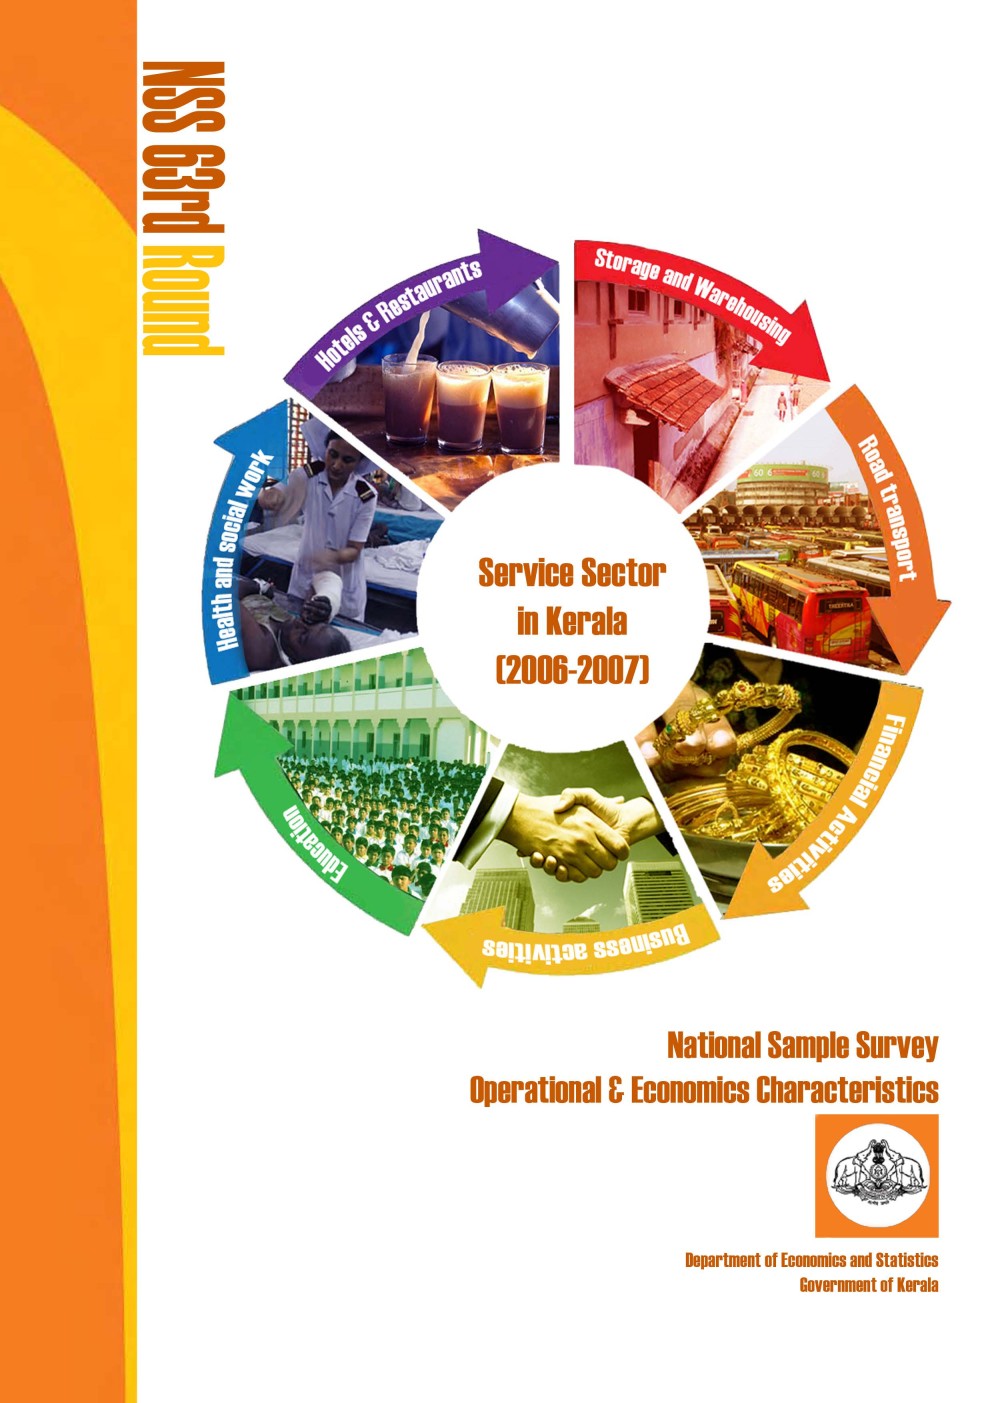 NSS 63th round - Service Sector Enterprises(Excluding Trade) in Kerala